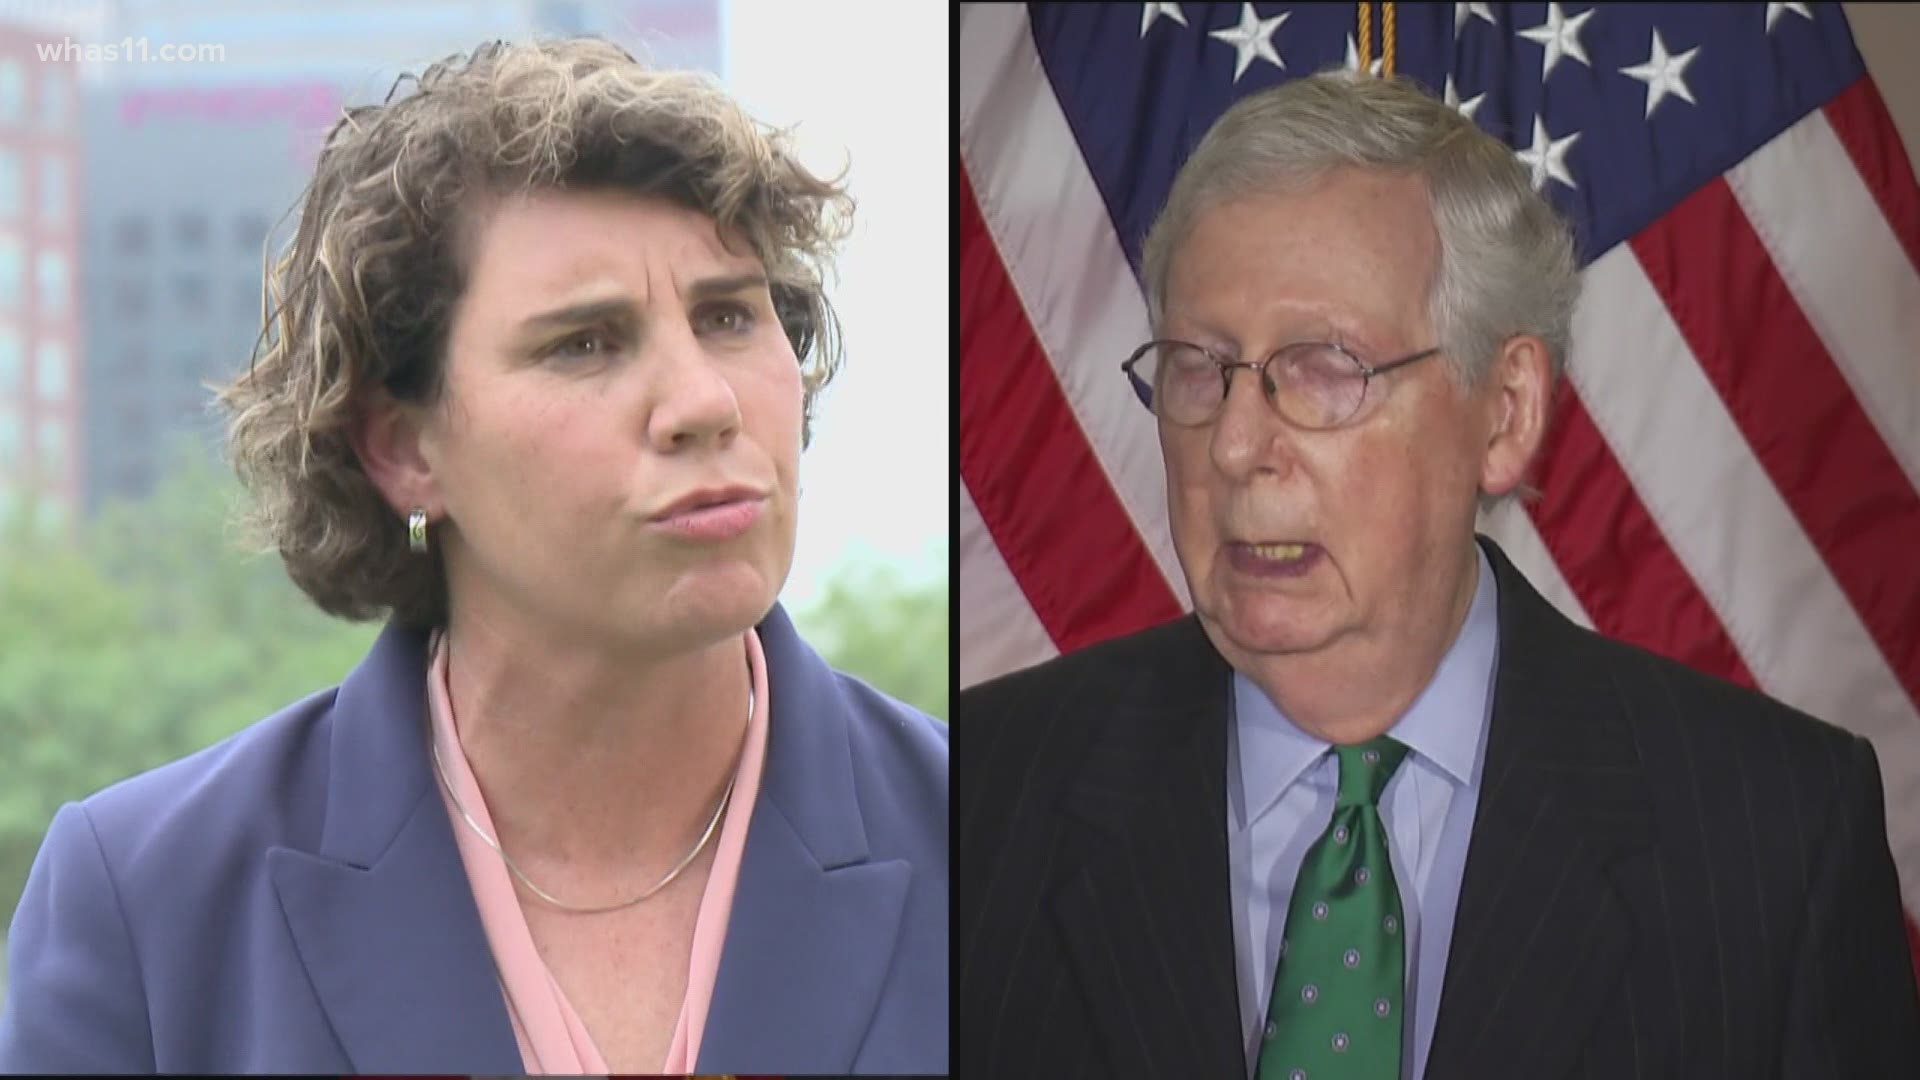 Sparring over COVID-19, the U.S. Supreme Court nominee, and the economy in Kentucky, both Senate candidates answered questions for an hour on WAVE-TV.